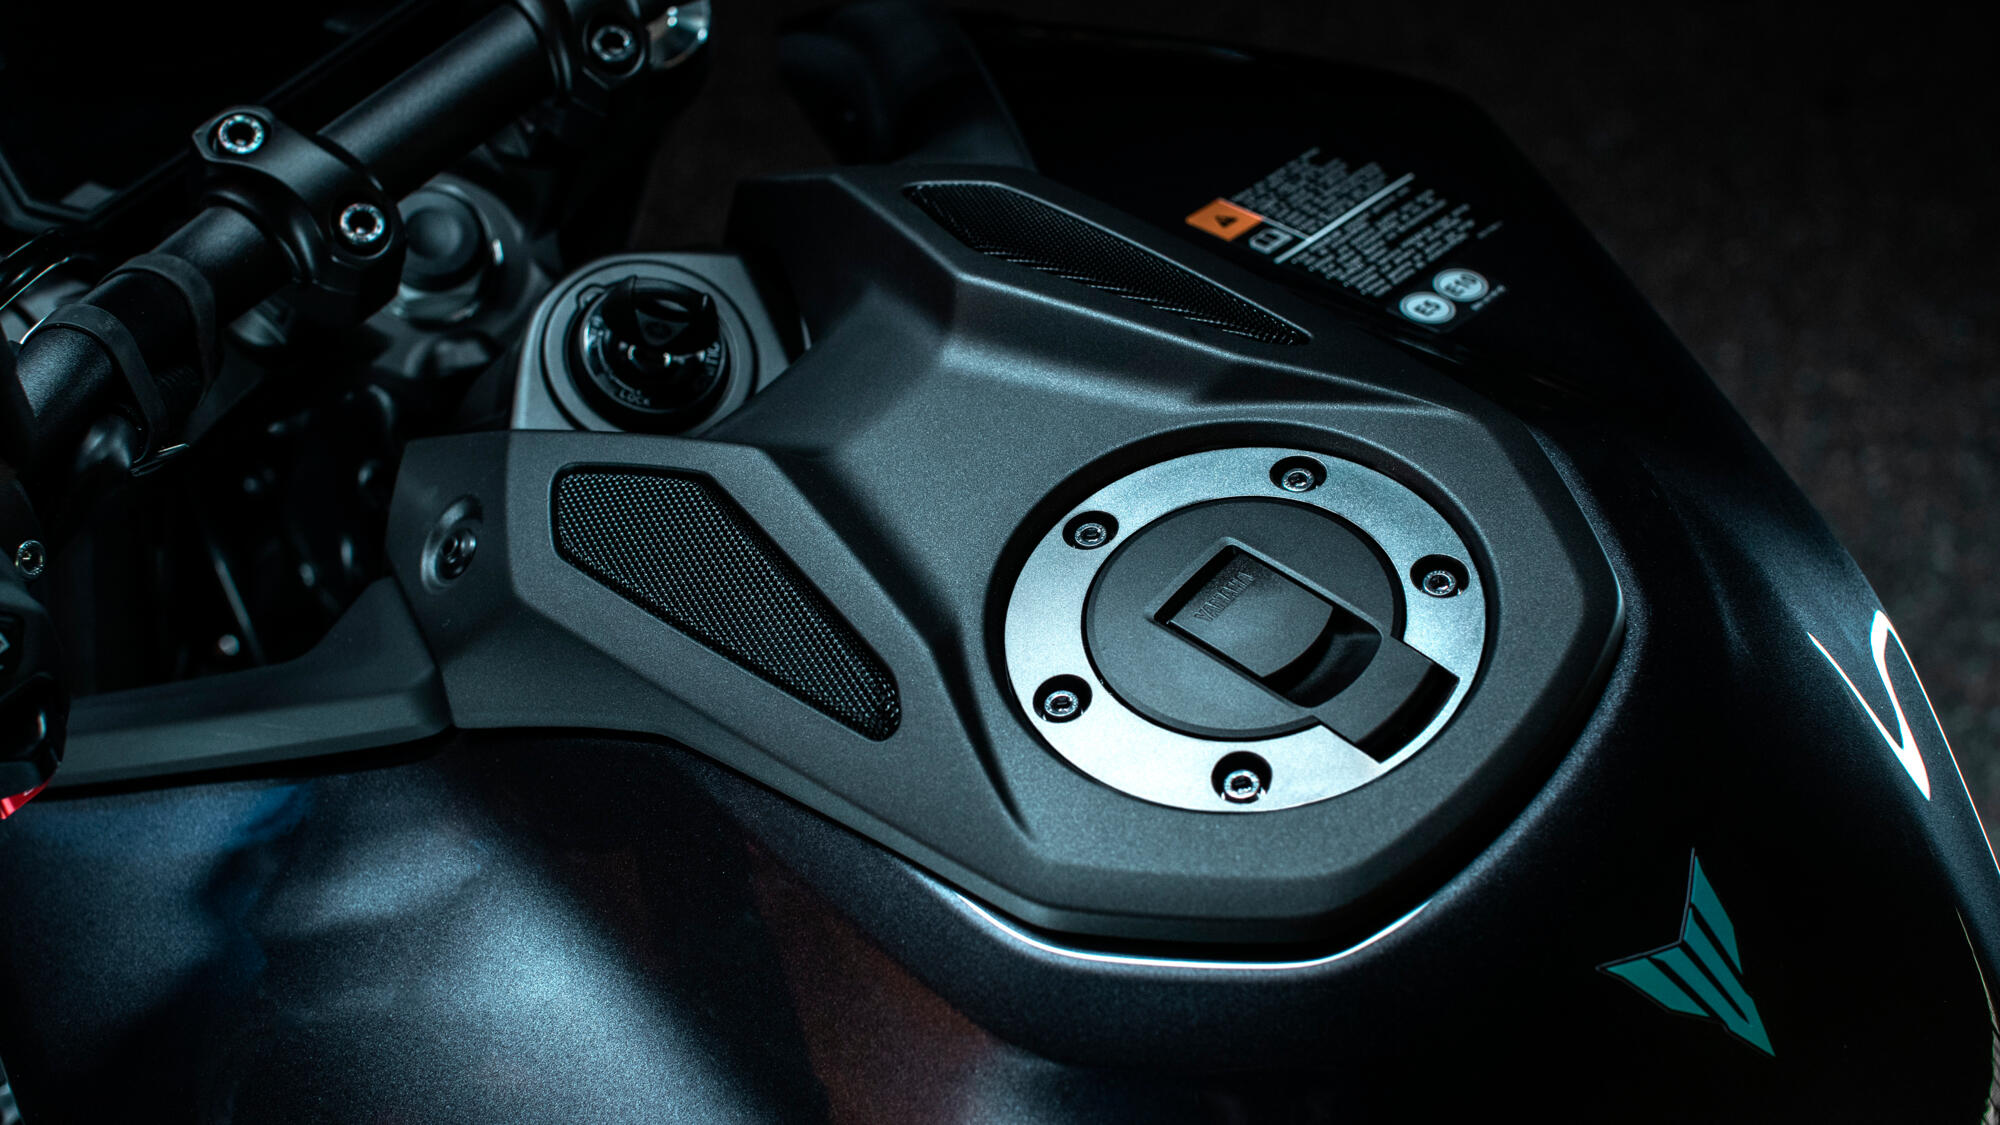 Acoustic amplifier grilles for an enhanced riding experience